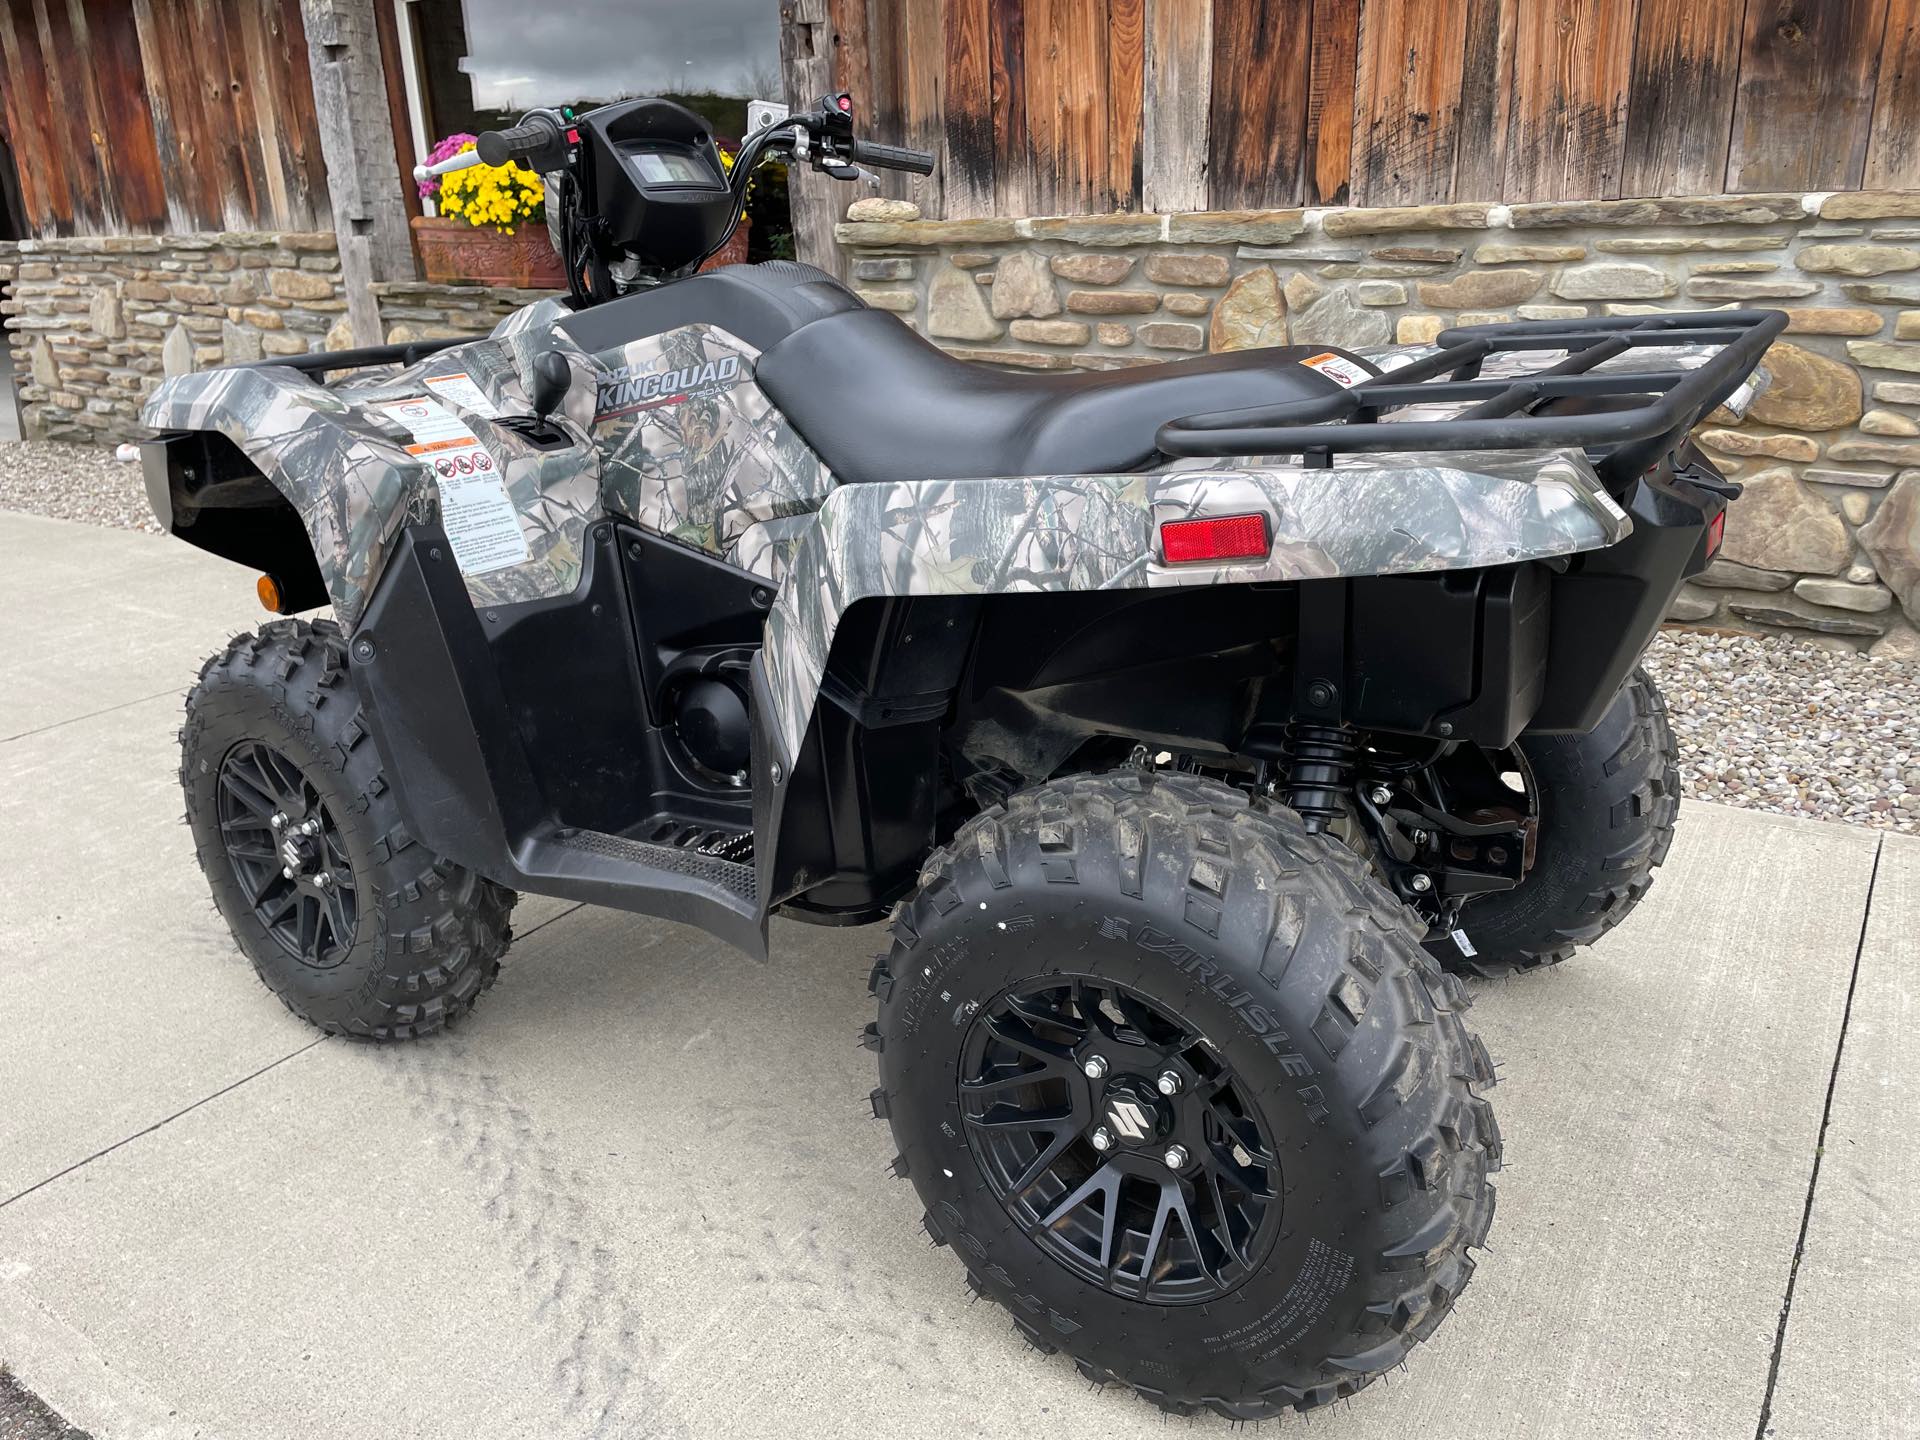 2020 Suzuki KingQuad 750 AXi Power Steering SE Camo at Arkport Cycles